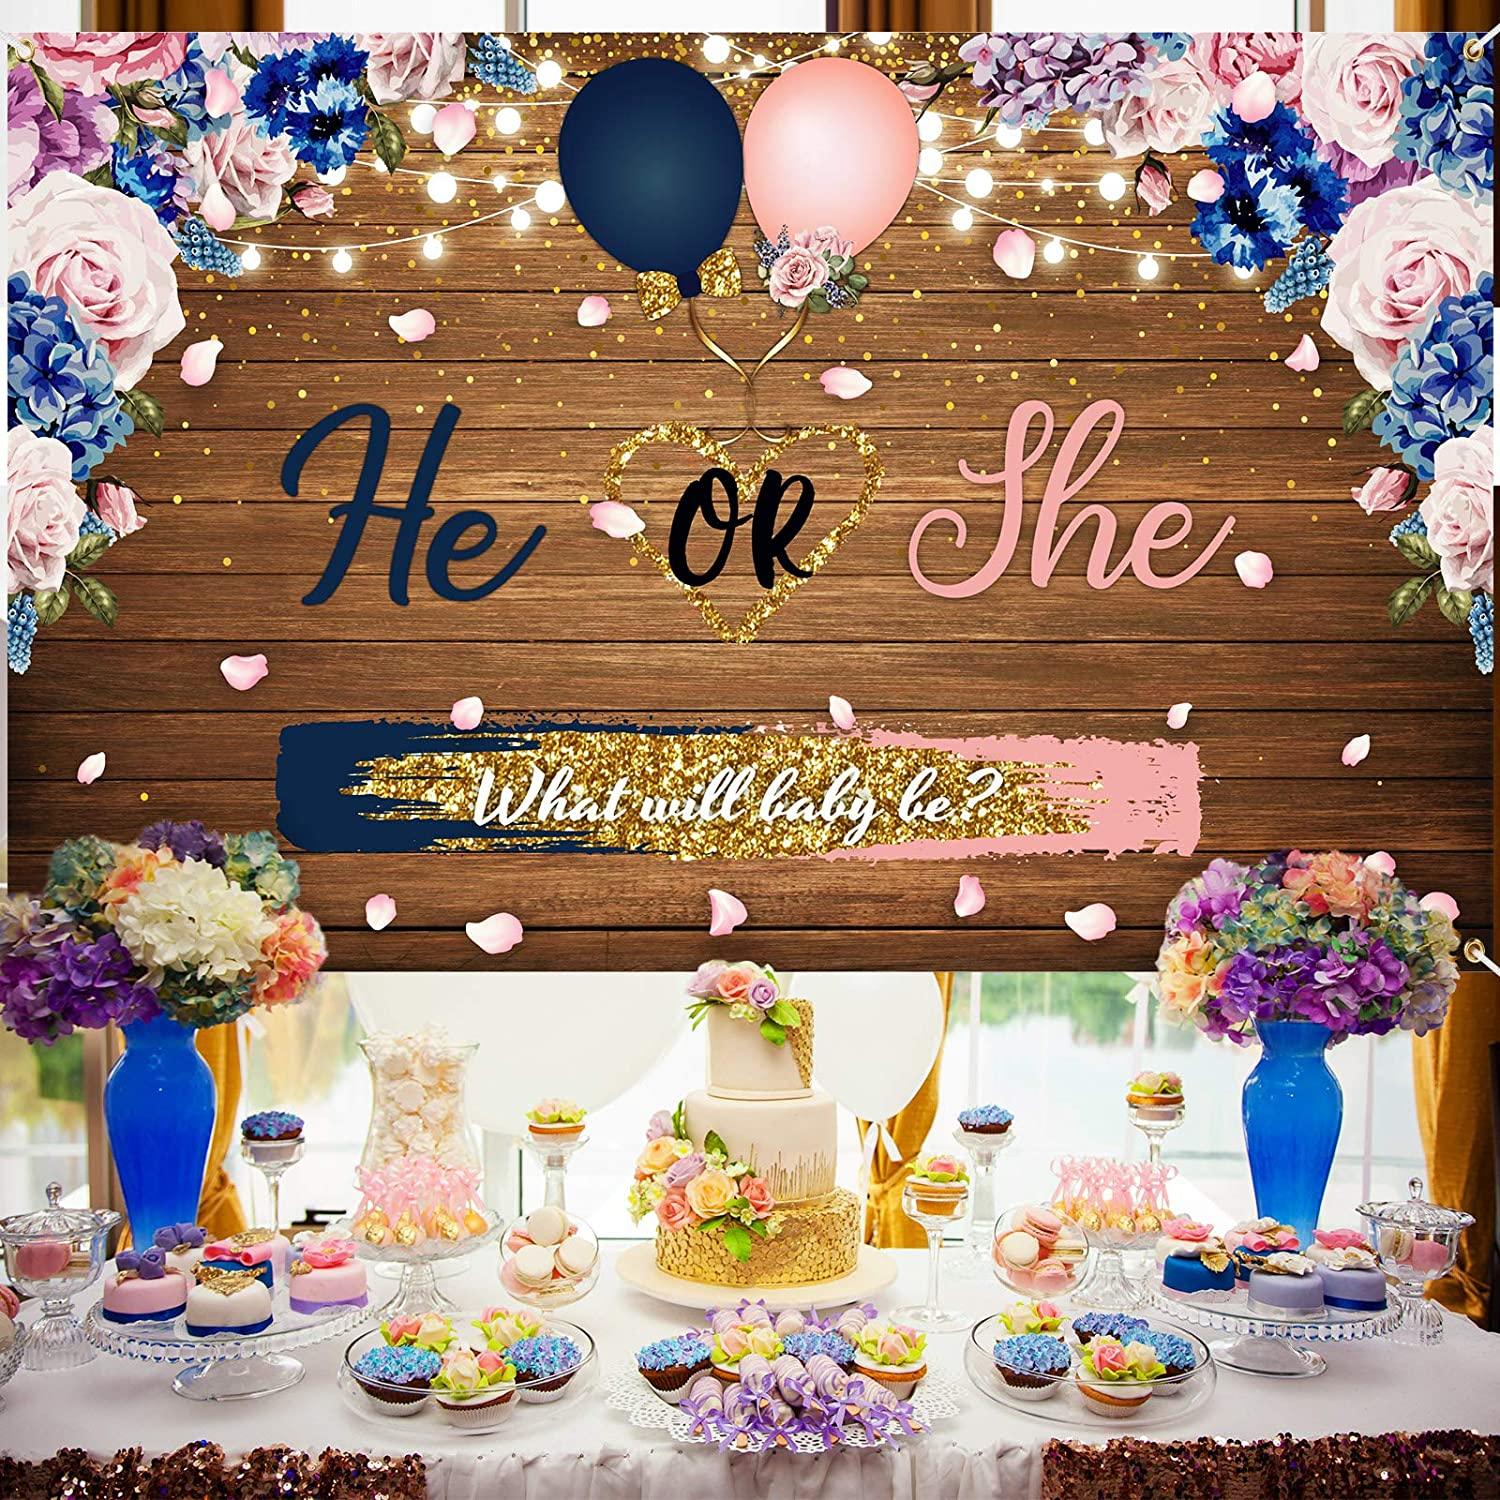 Gender Reveal Decorations Backdrop Banner He or She What Will Baby be Wooden Baby Gender Photography Background - Decotree.co Online Shop